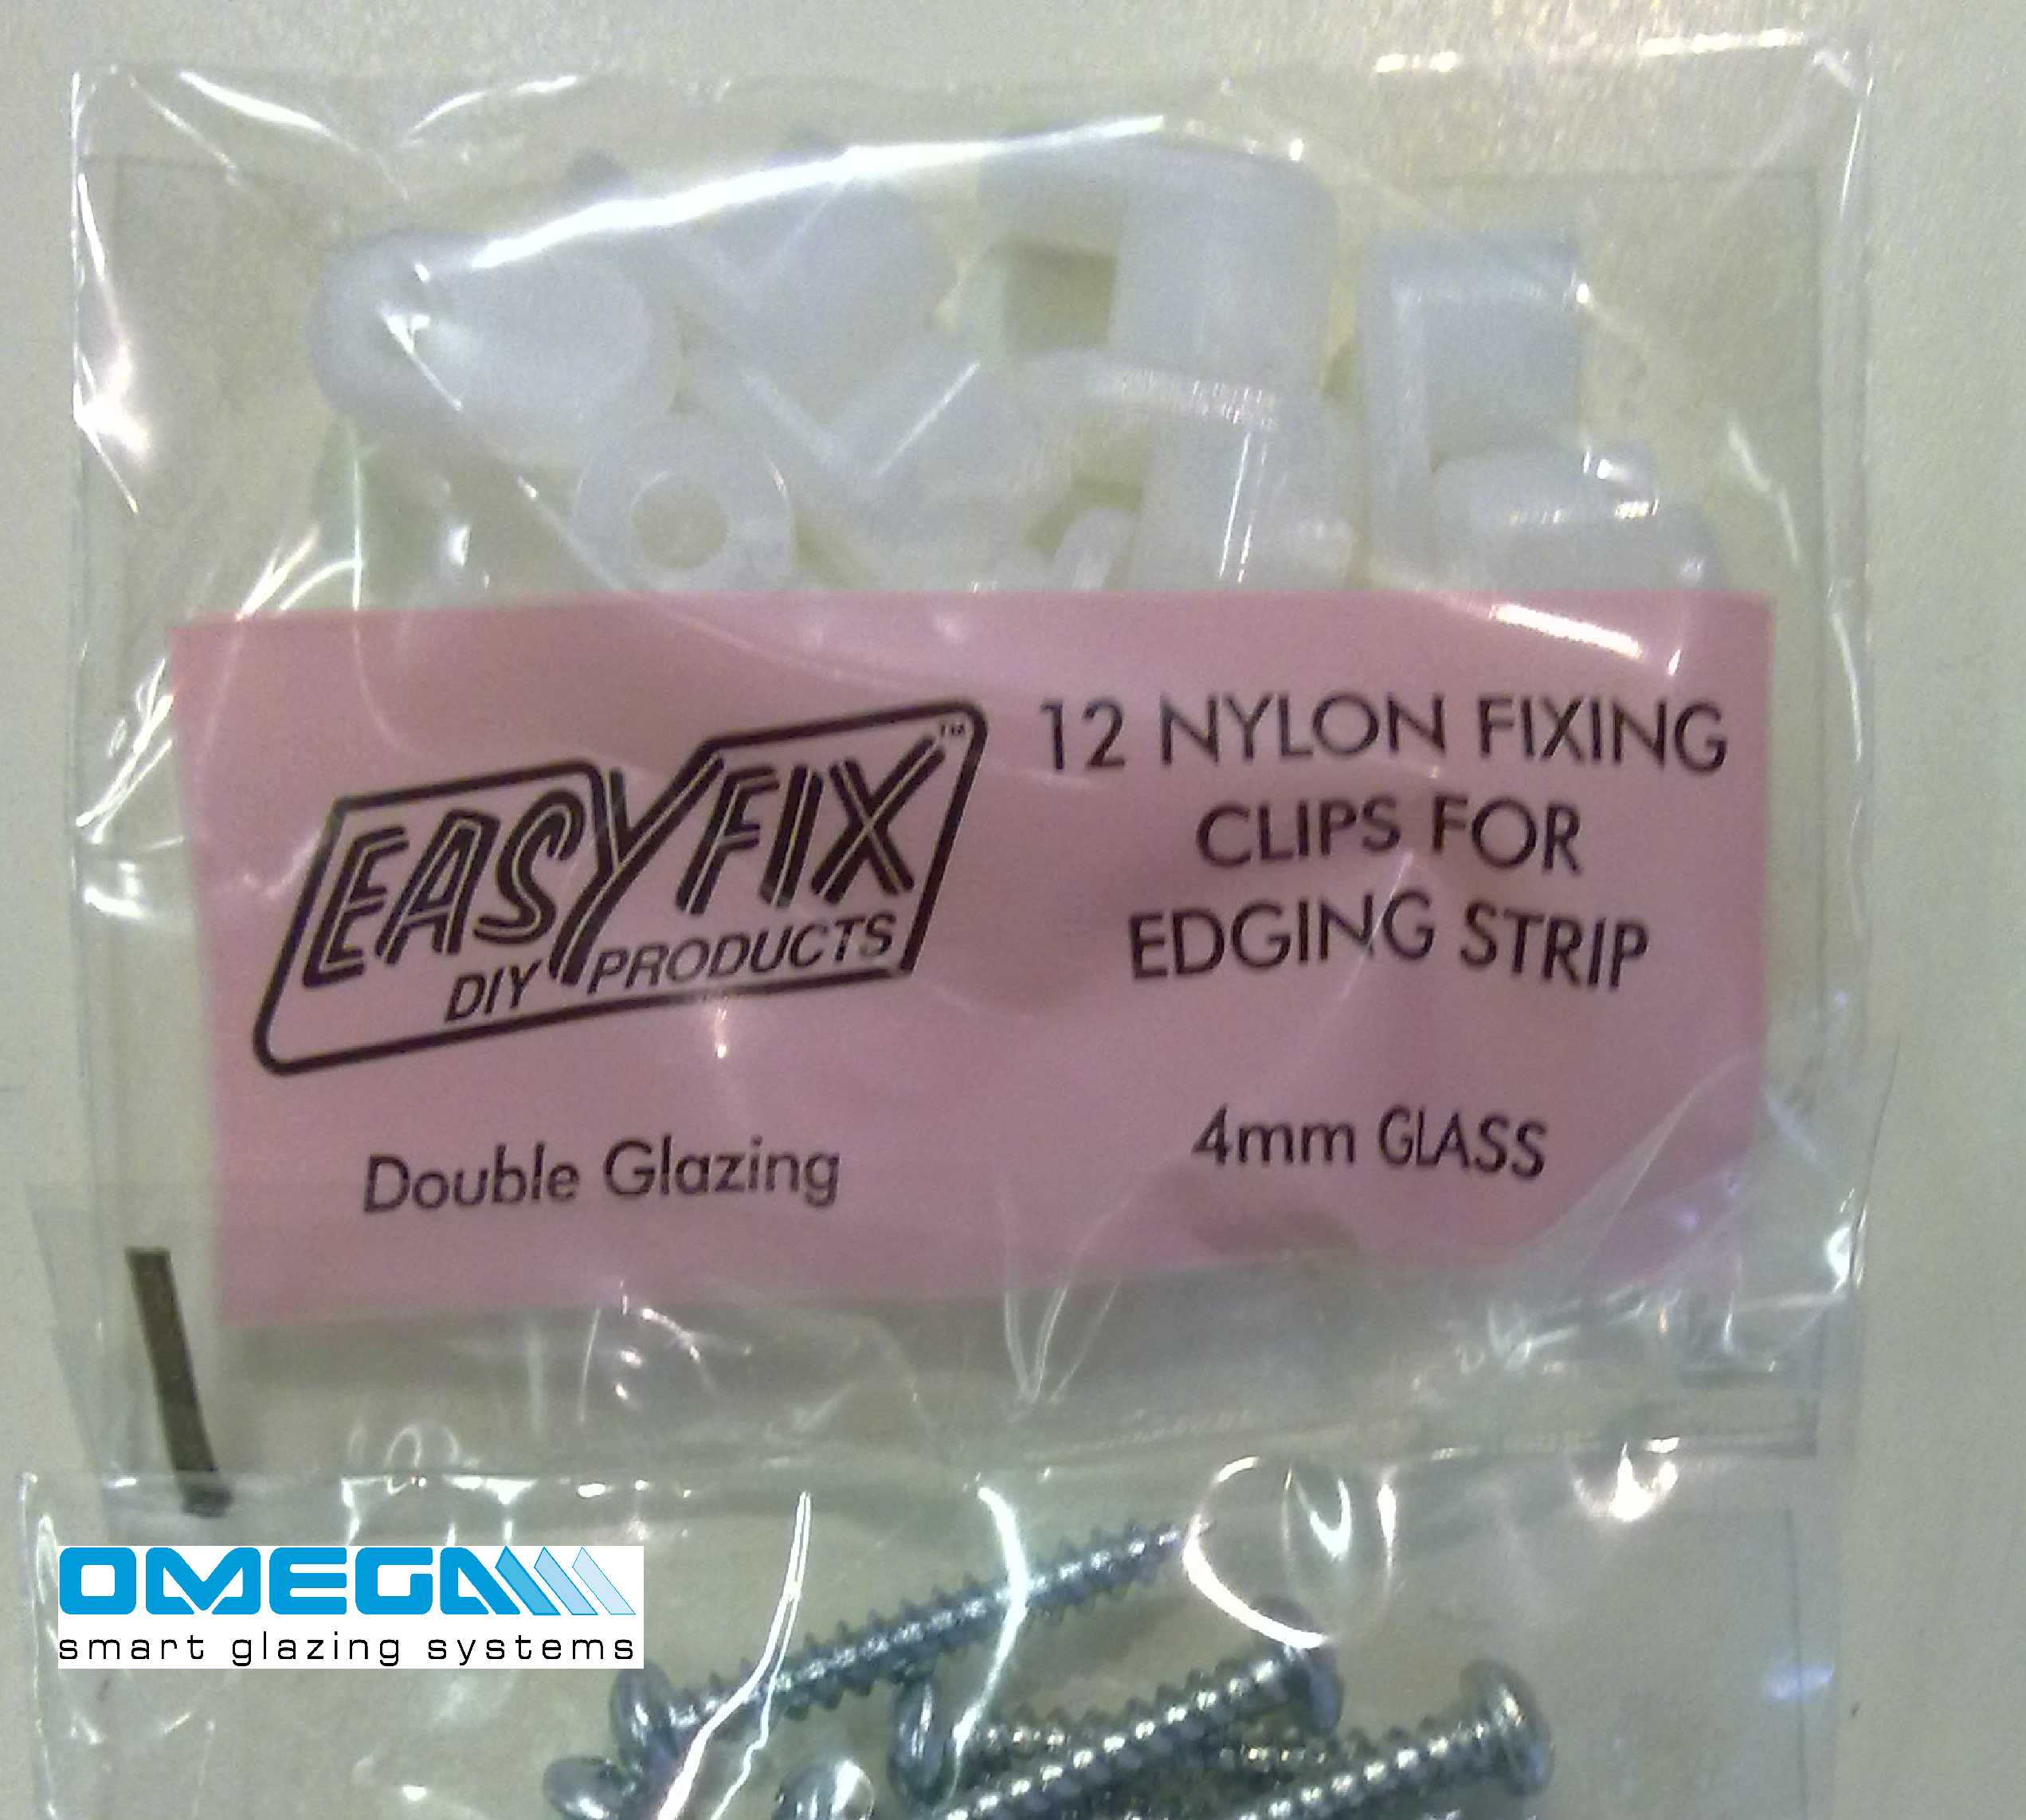 Buy Easyfix Nylon Clips - For 2mm Glazing Thickness, White online today